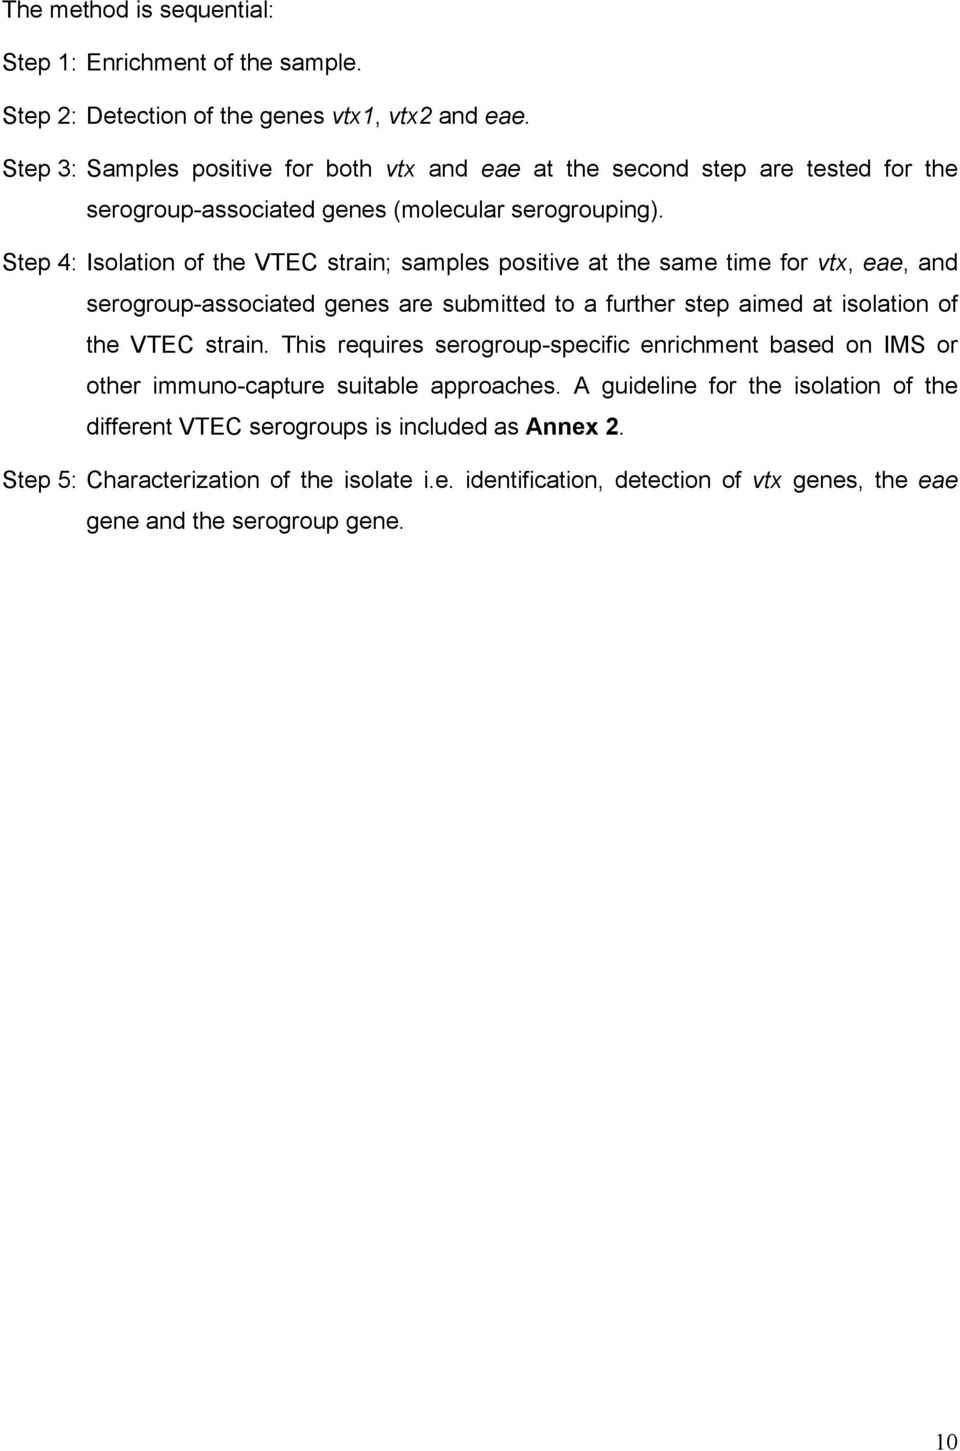 Step 4: Isolation of the VTEC strain; samples positive at the same time for vtx, eae, and serogroup-associated genes are submitted to a further step aimed at isolation of the VTEC strain.